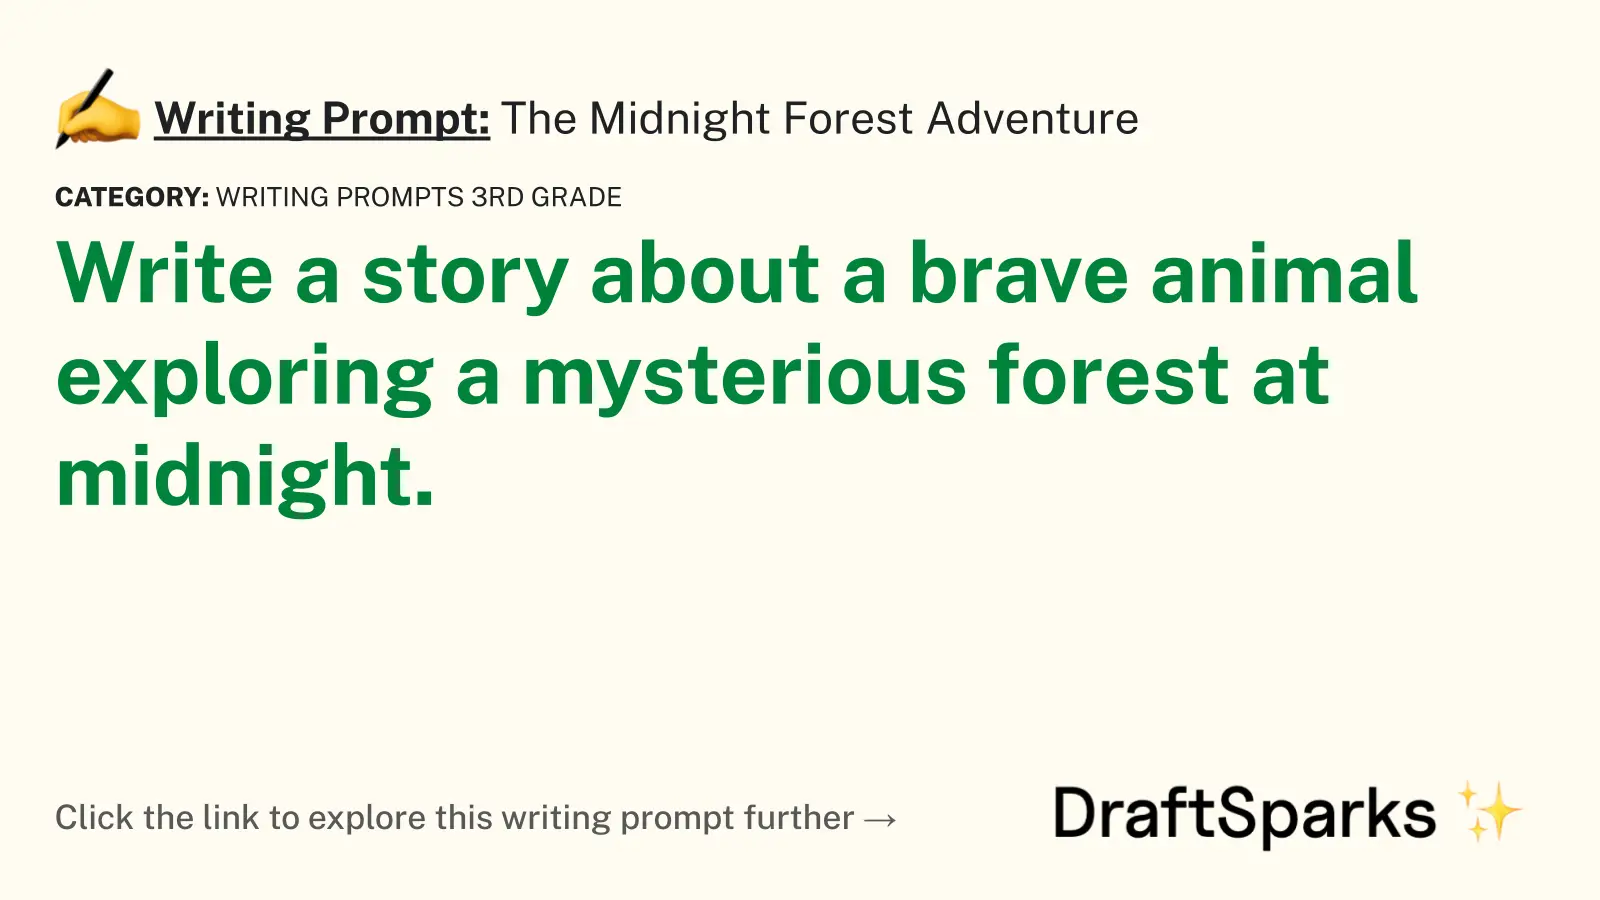 The Midnight Forest Adventure